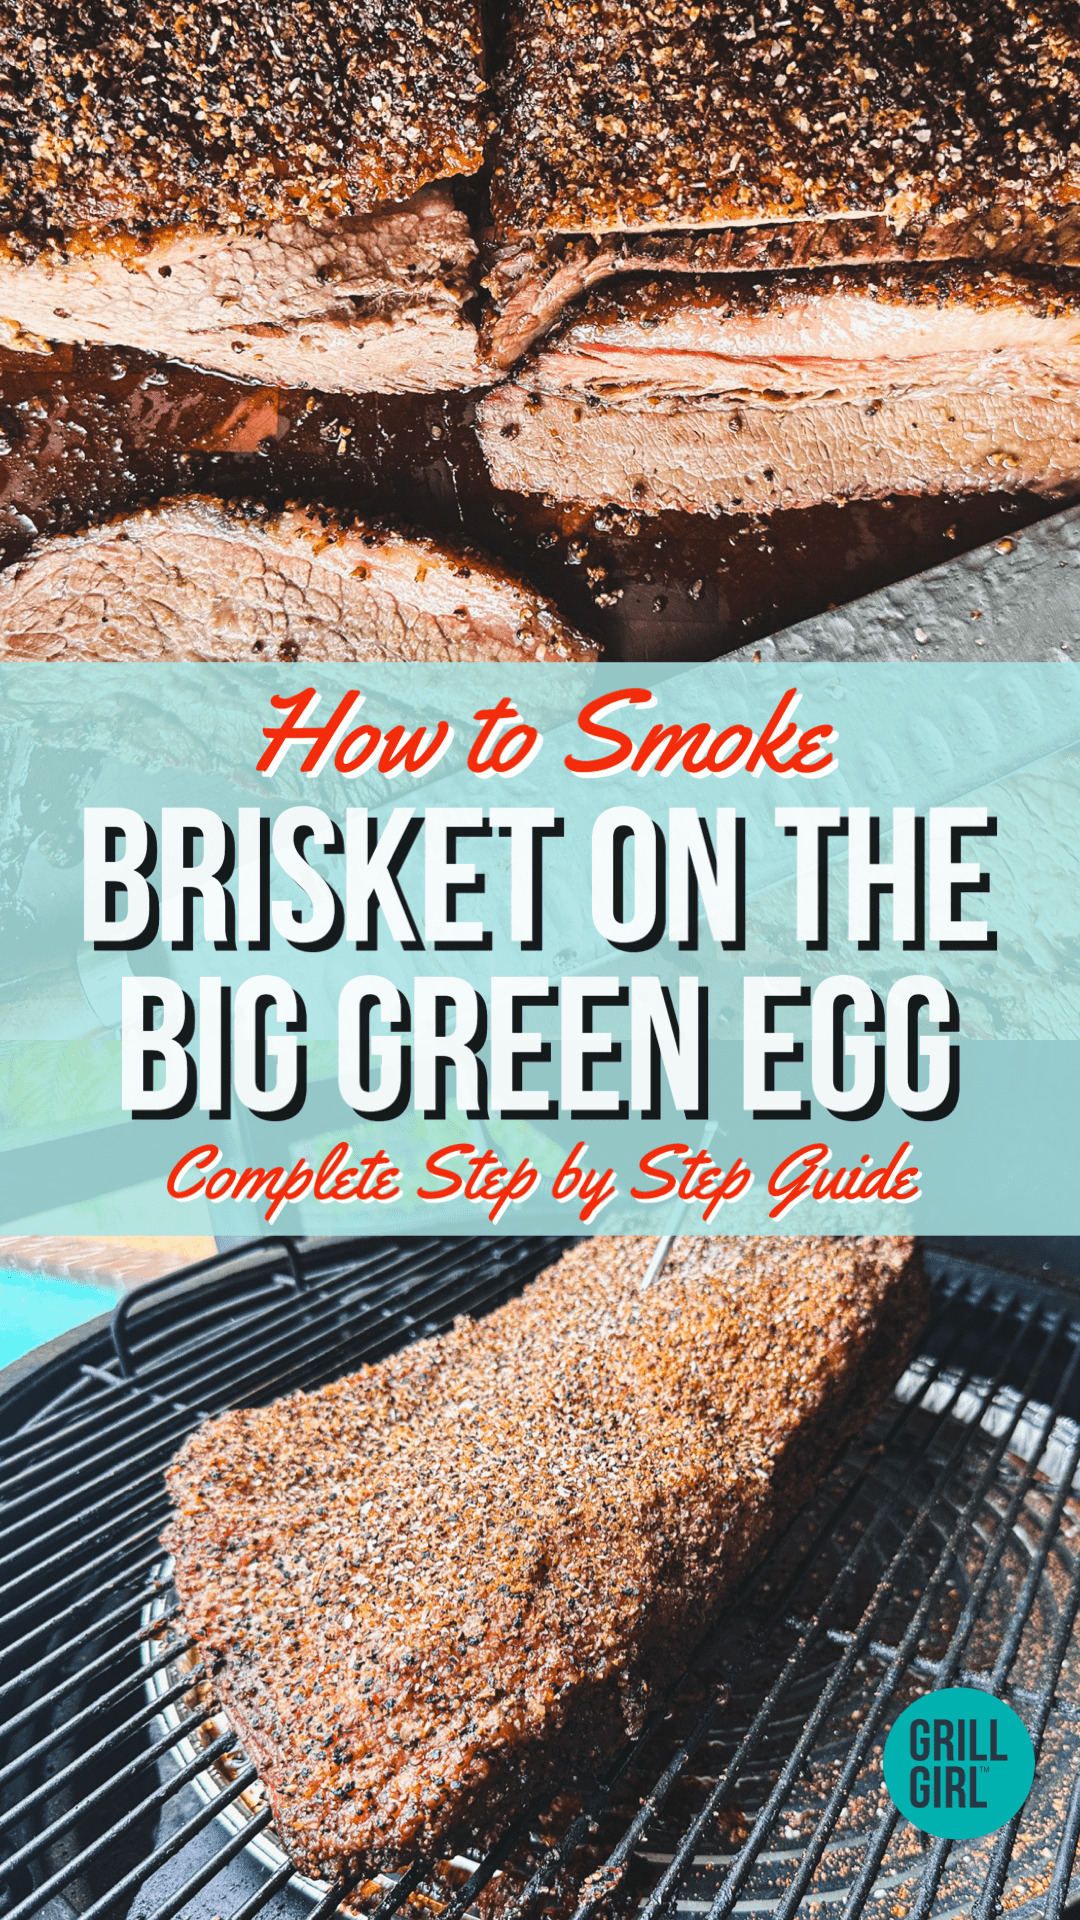 The Ultimate Guide to Cooking Brisket on the Big Green Egg